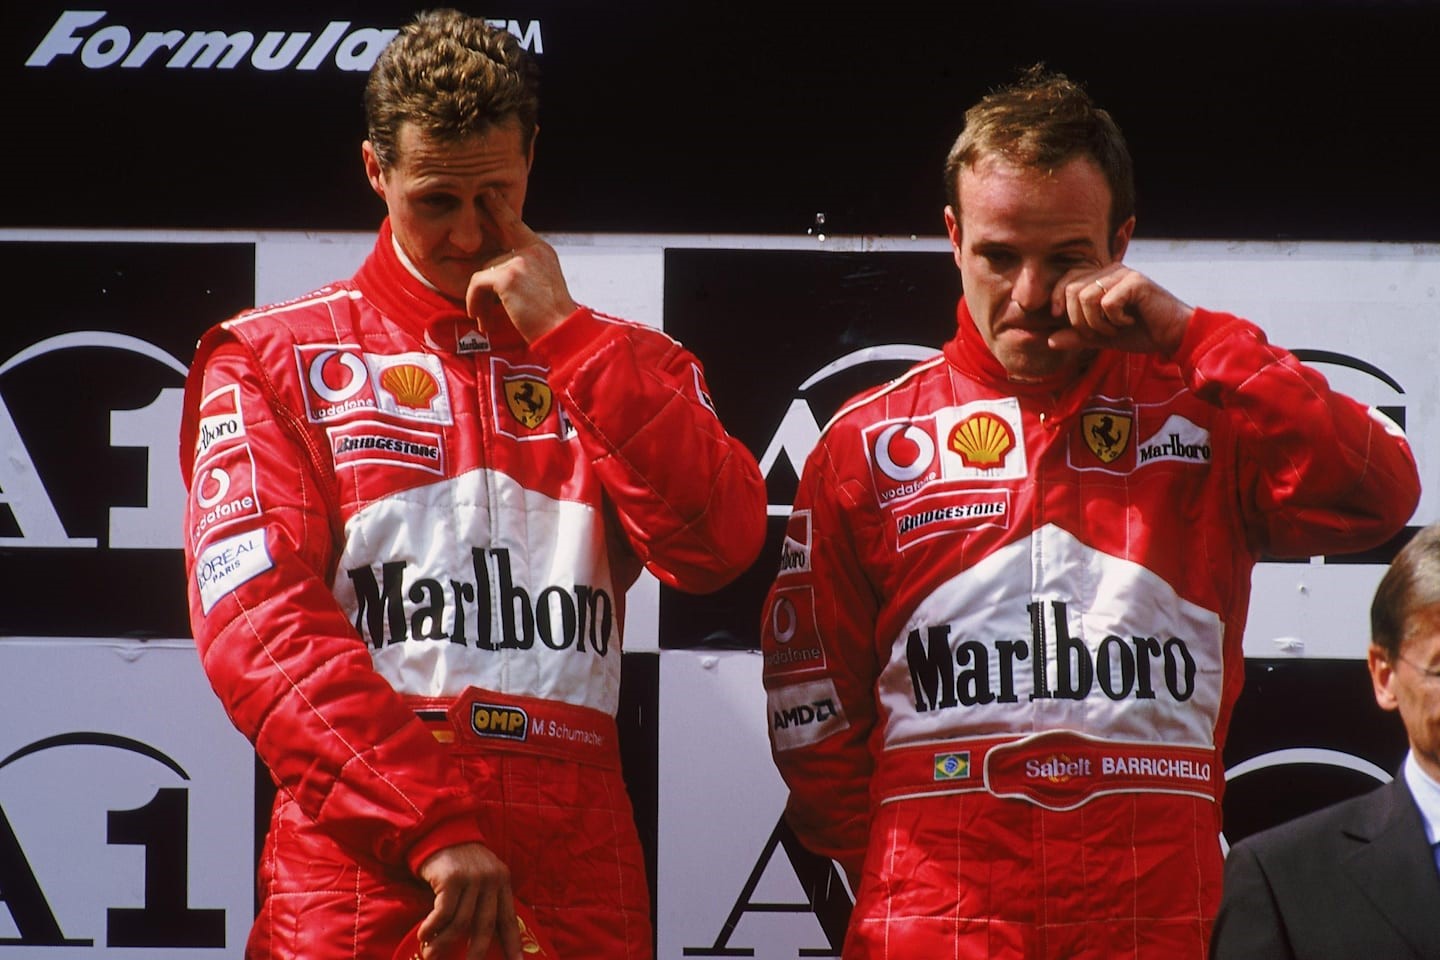 The win that never was Schumacher and Barrichello. 